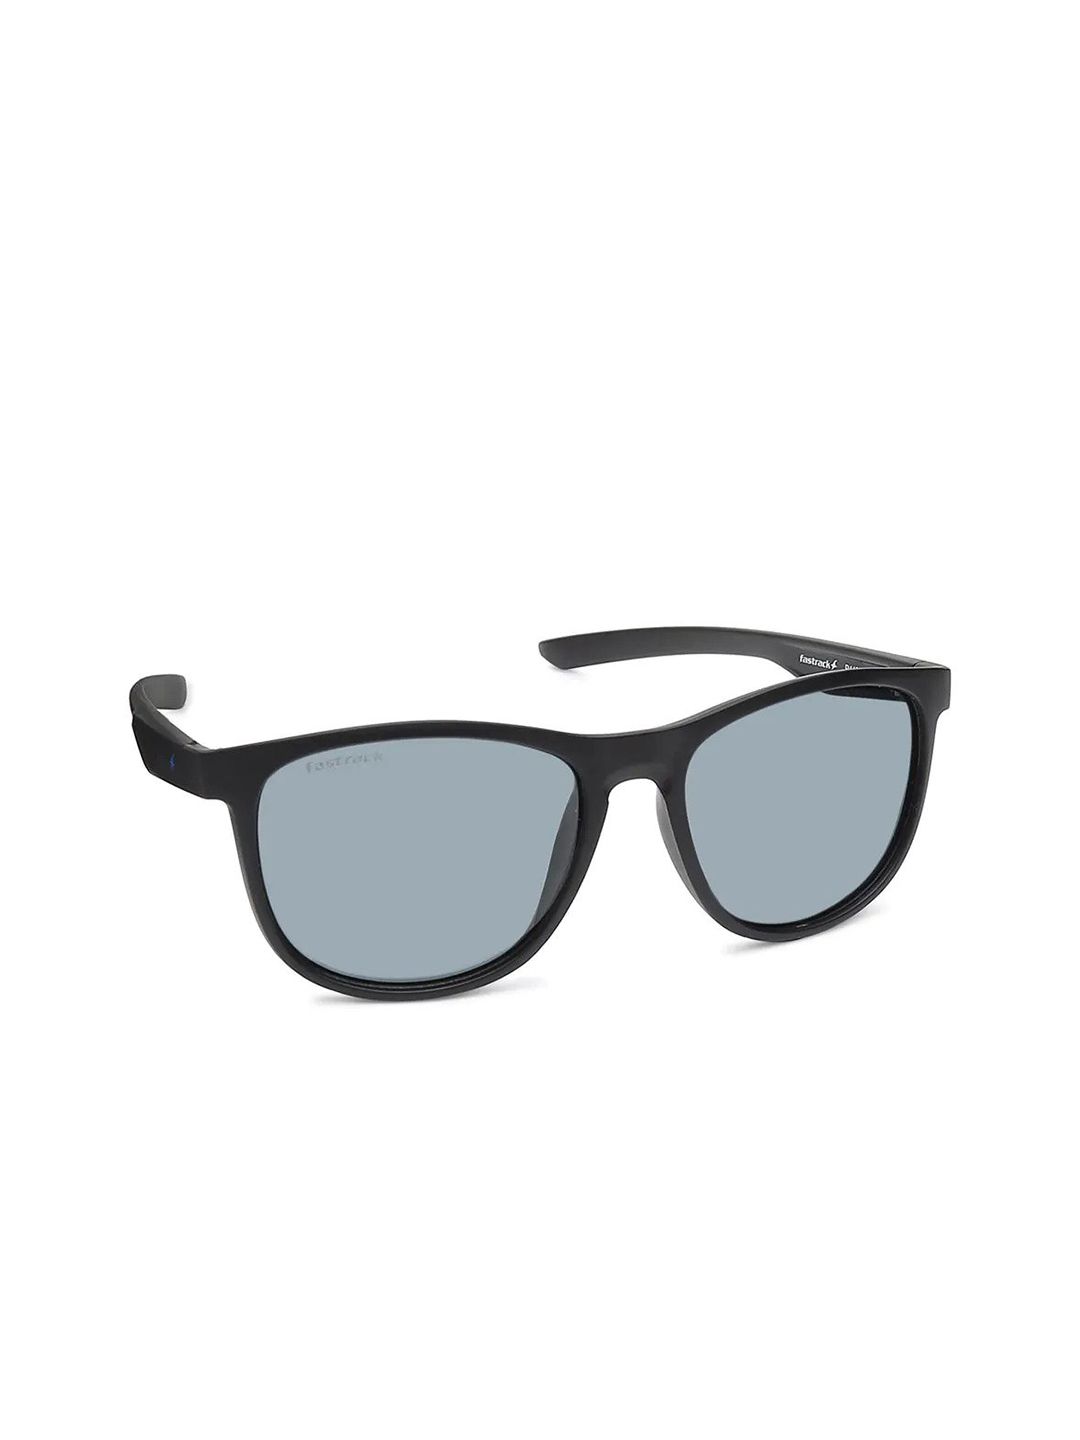 Fastrack Unisex Black Lens & Black Square Sunglasses with UV Protected Lens Price in India